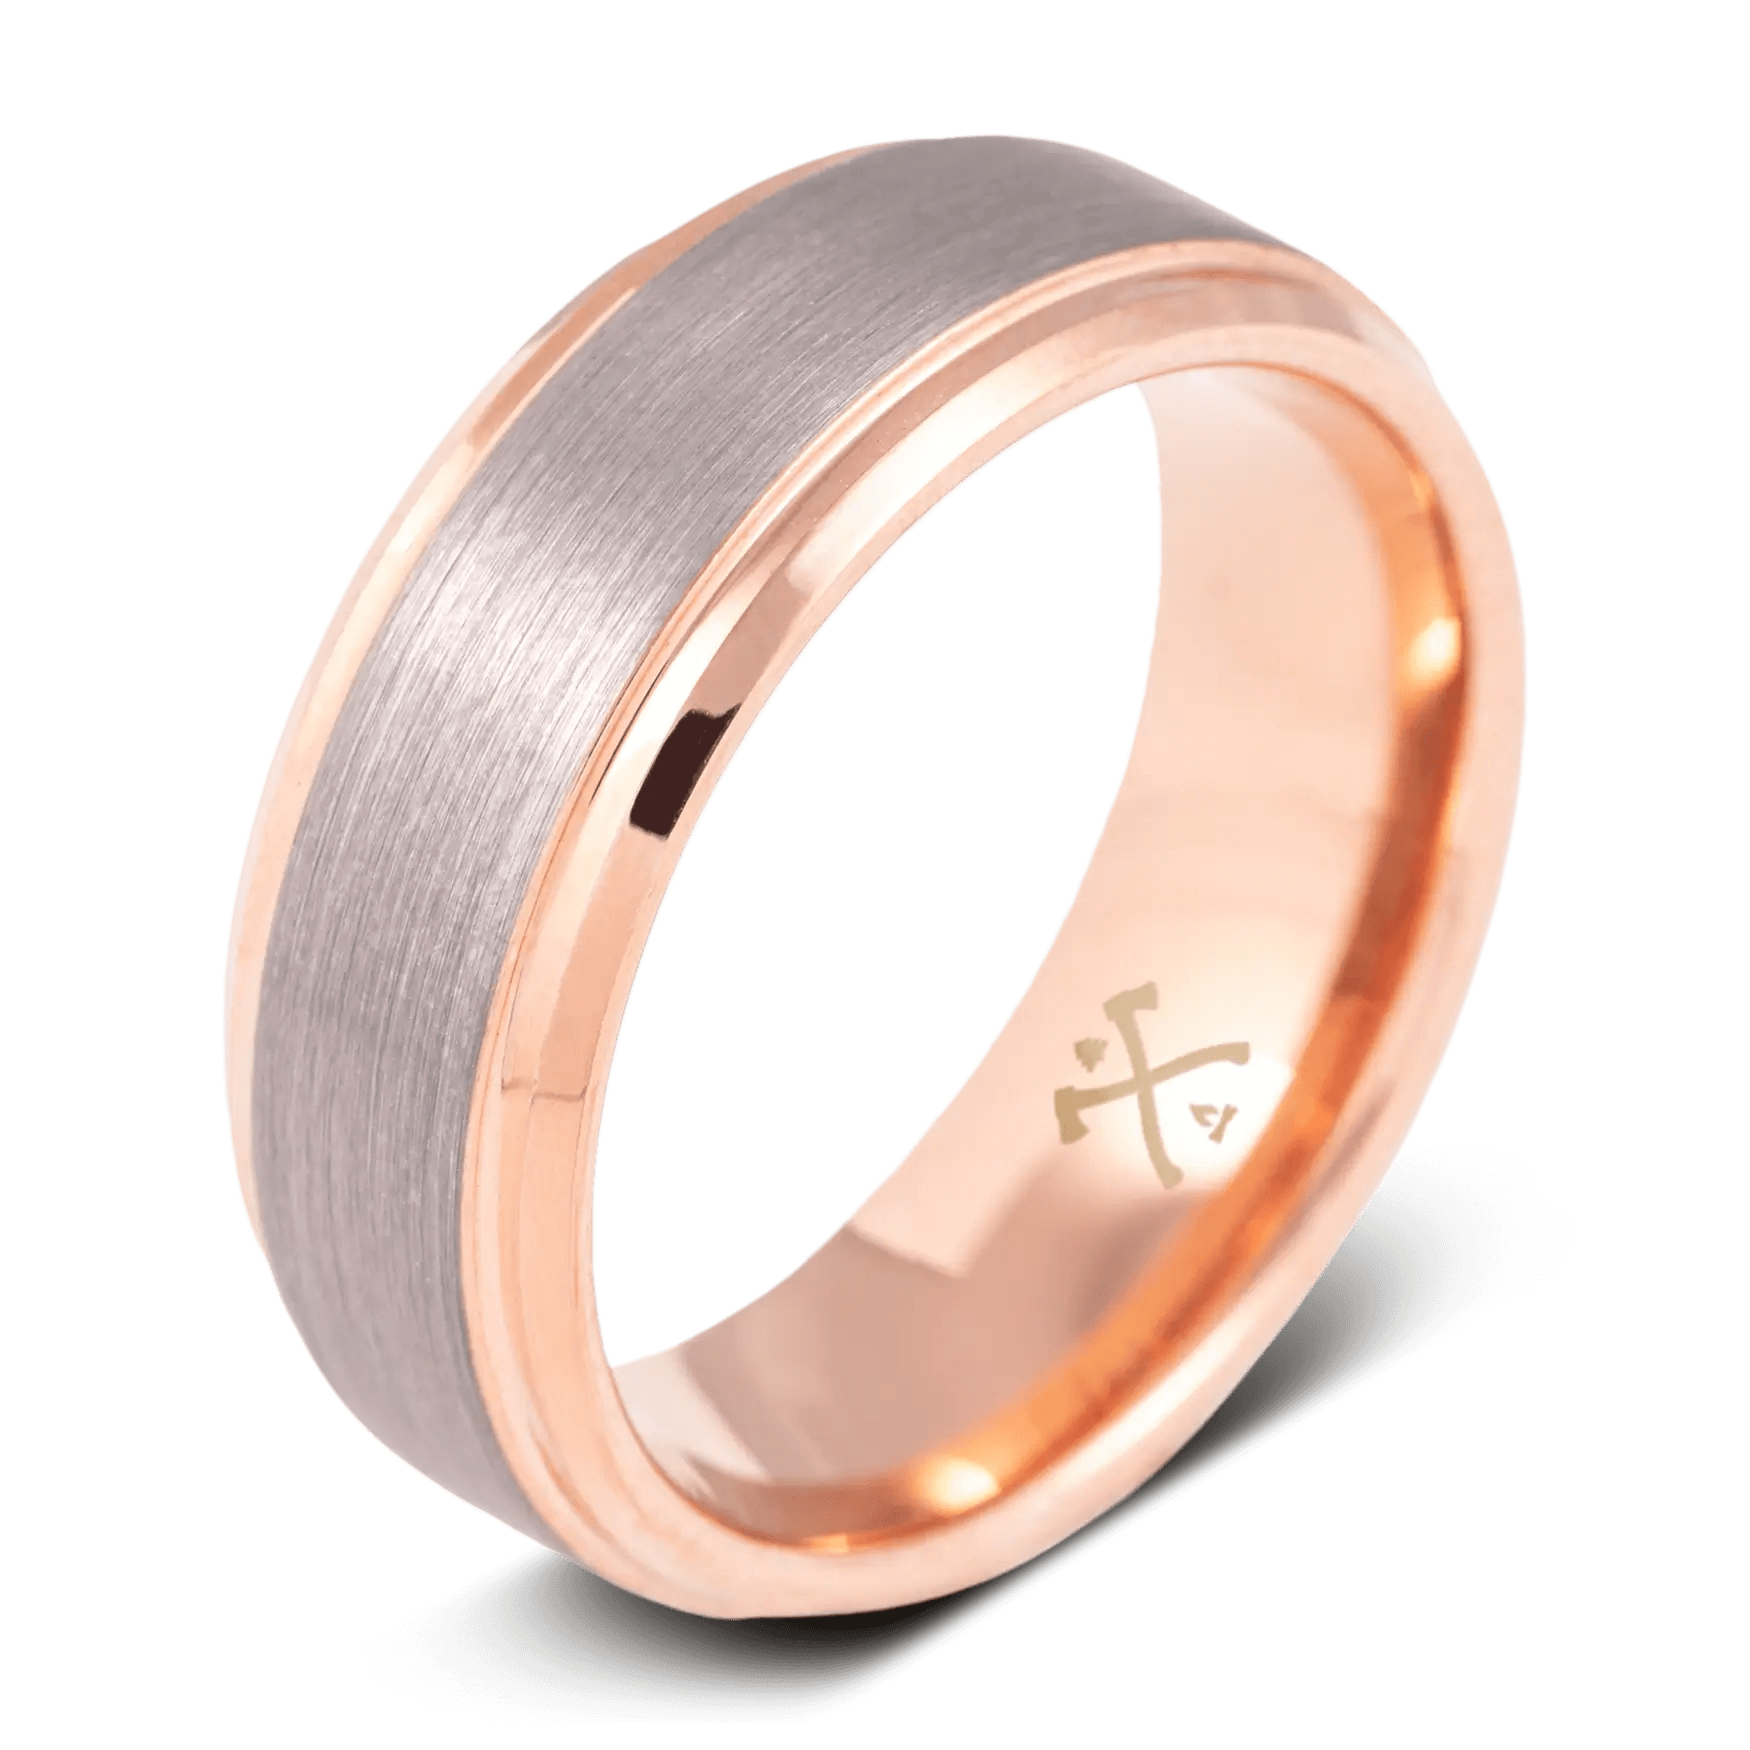 8mm) Unisex or Men's Black and Rose Gold Inside Matte Finish Tungsten  Carbide Wedding Ring Band with Beveled Edges. - Ring Blingers |